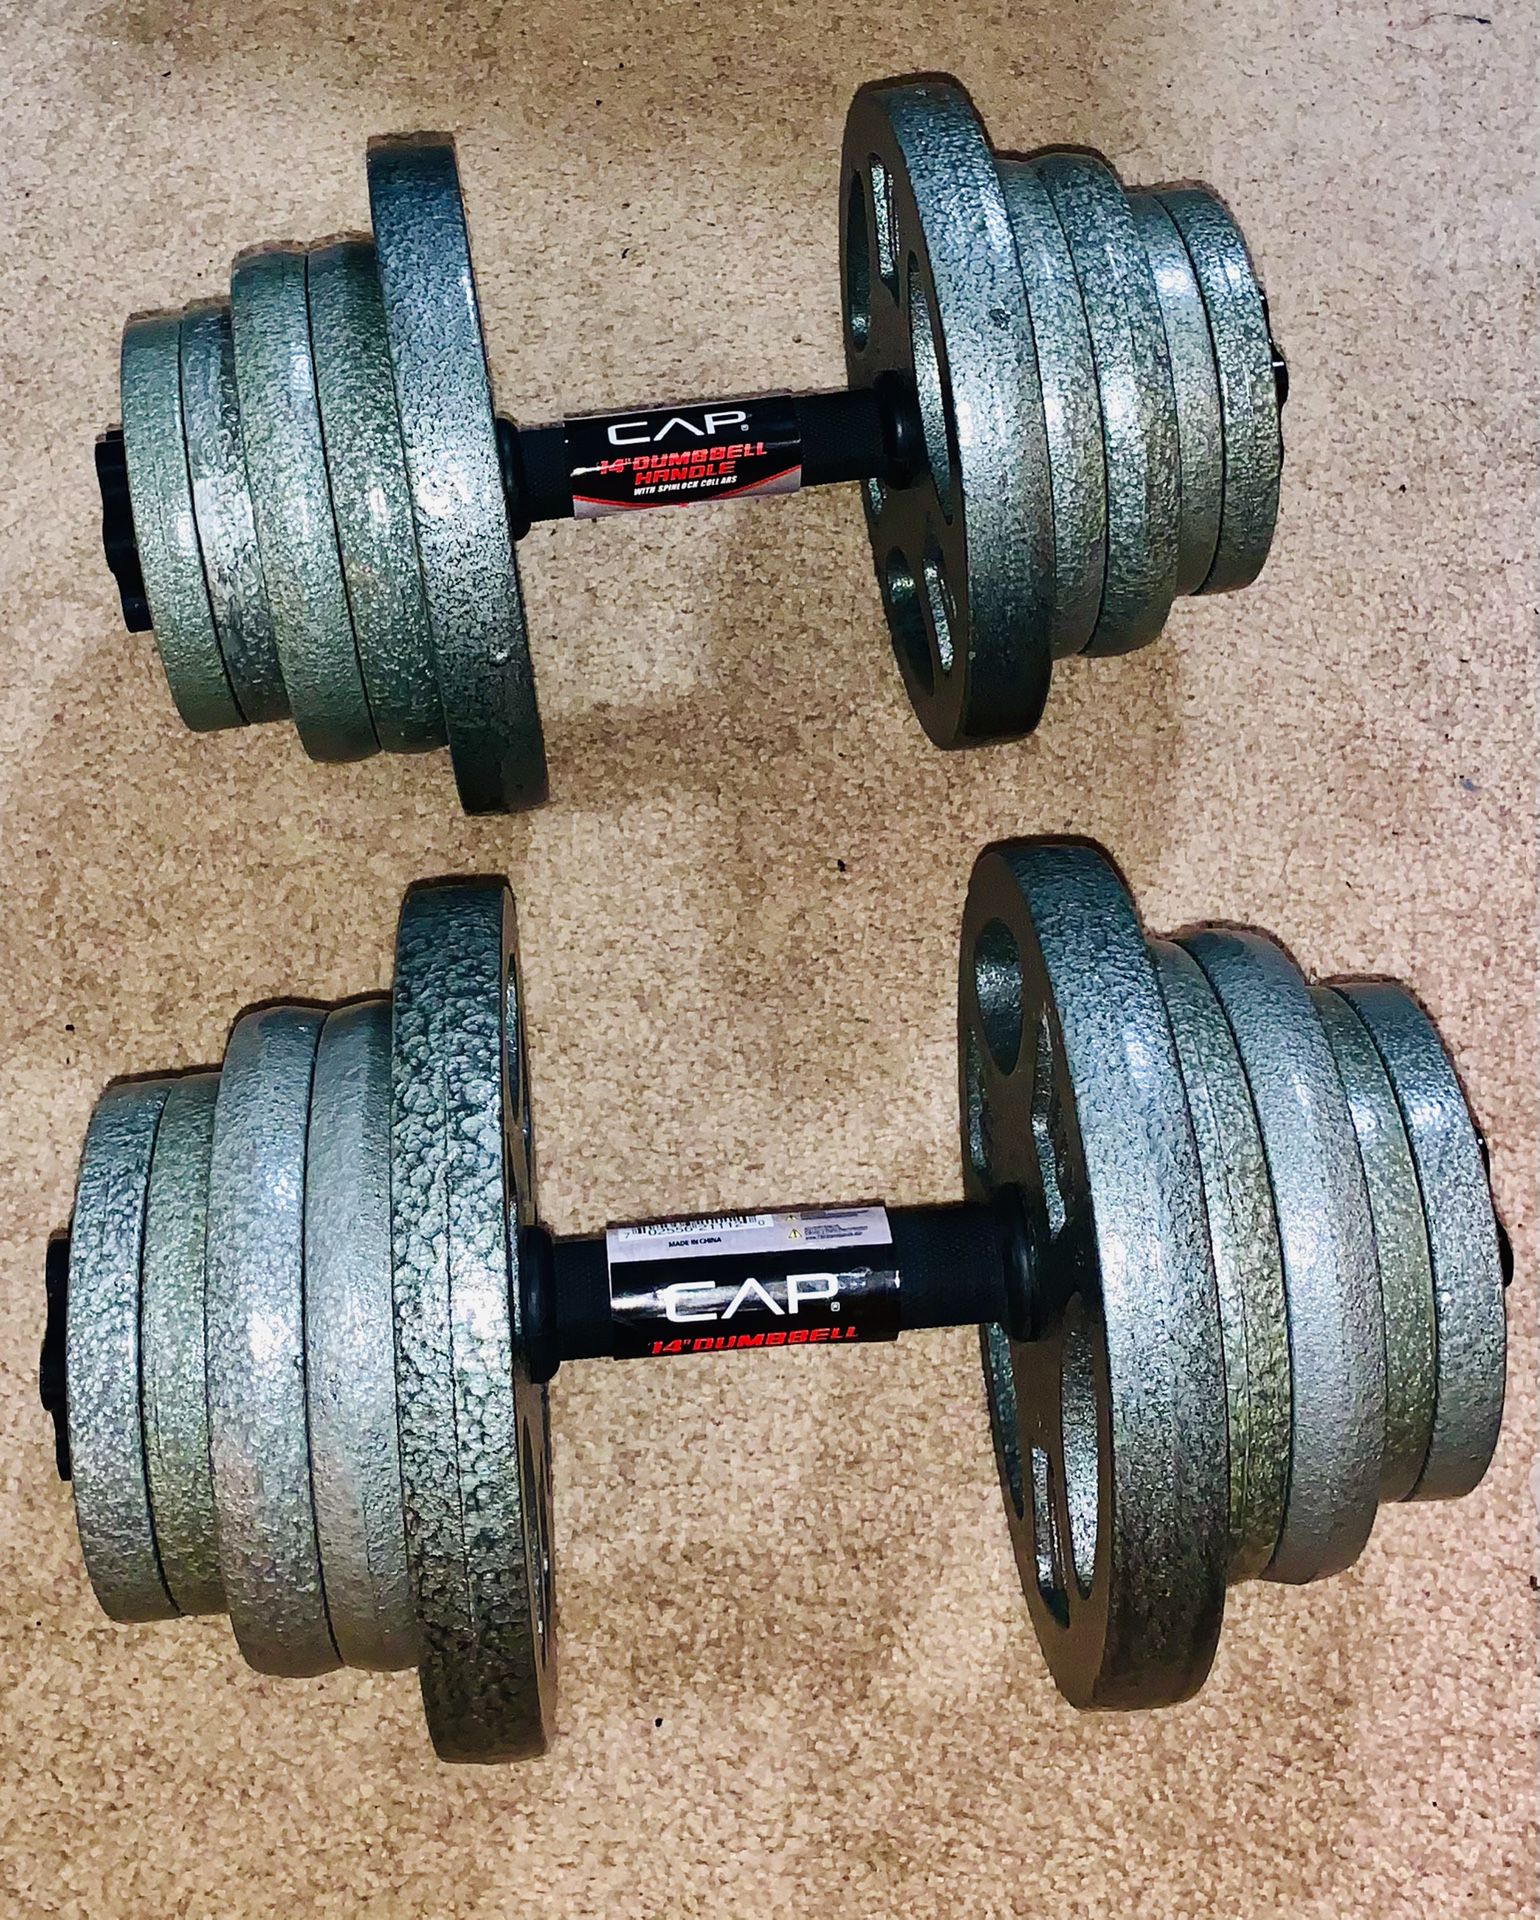 Cap Adjustable Dumbbell Pair 52.5lb Each, Weight&Adjustability Identical to Bowflex 552 Set New!